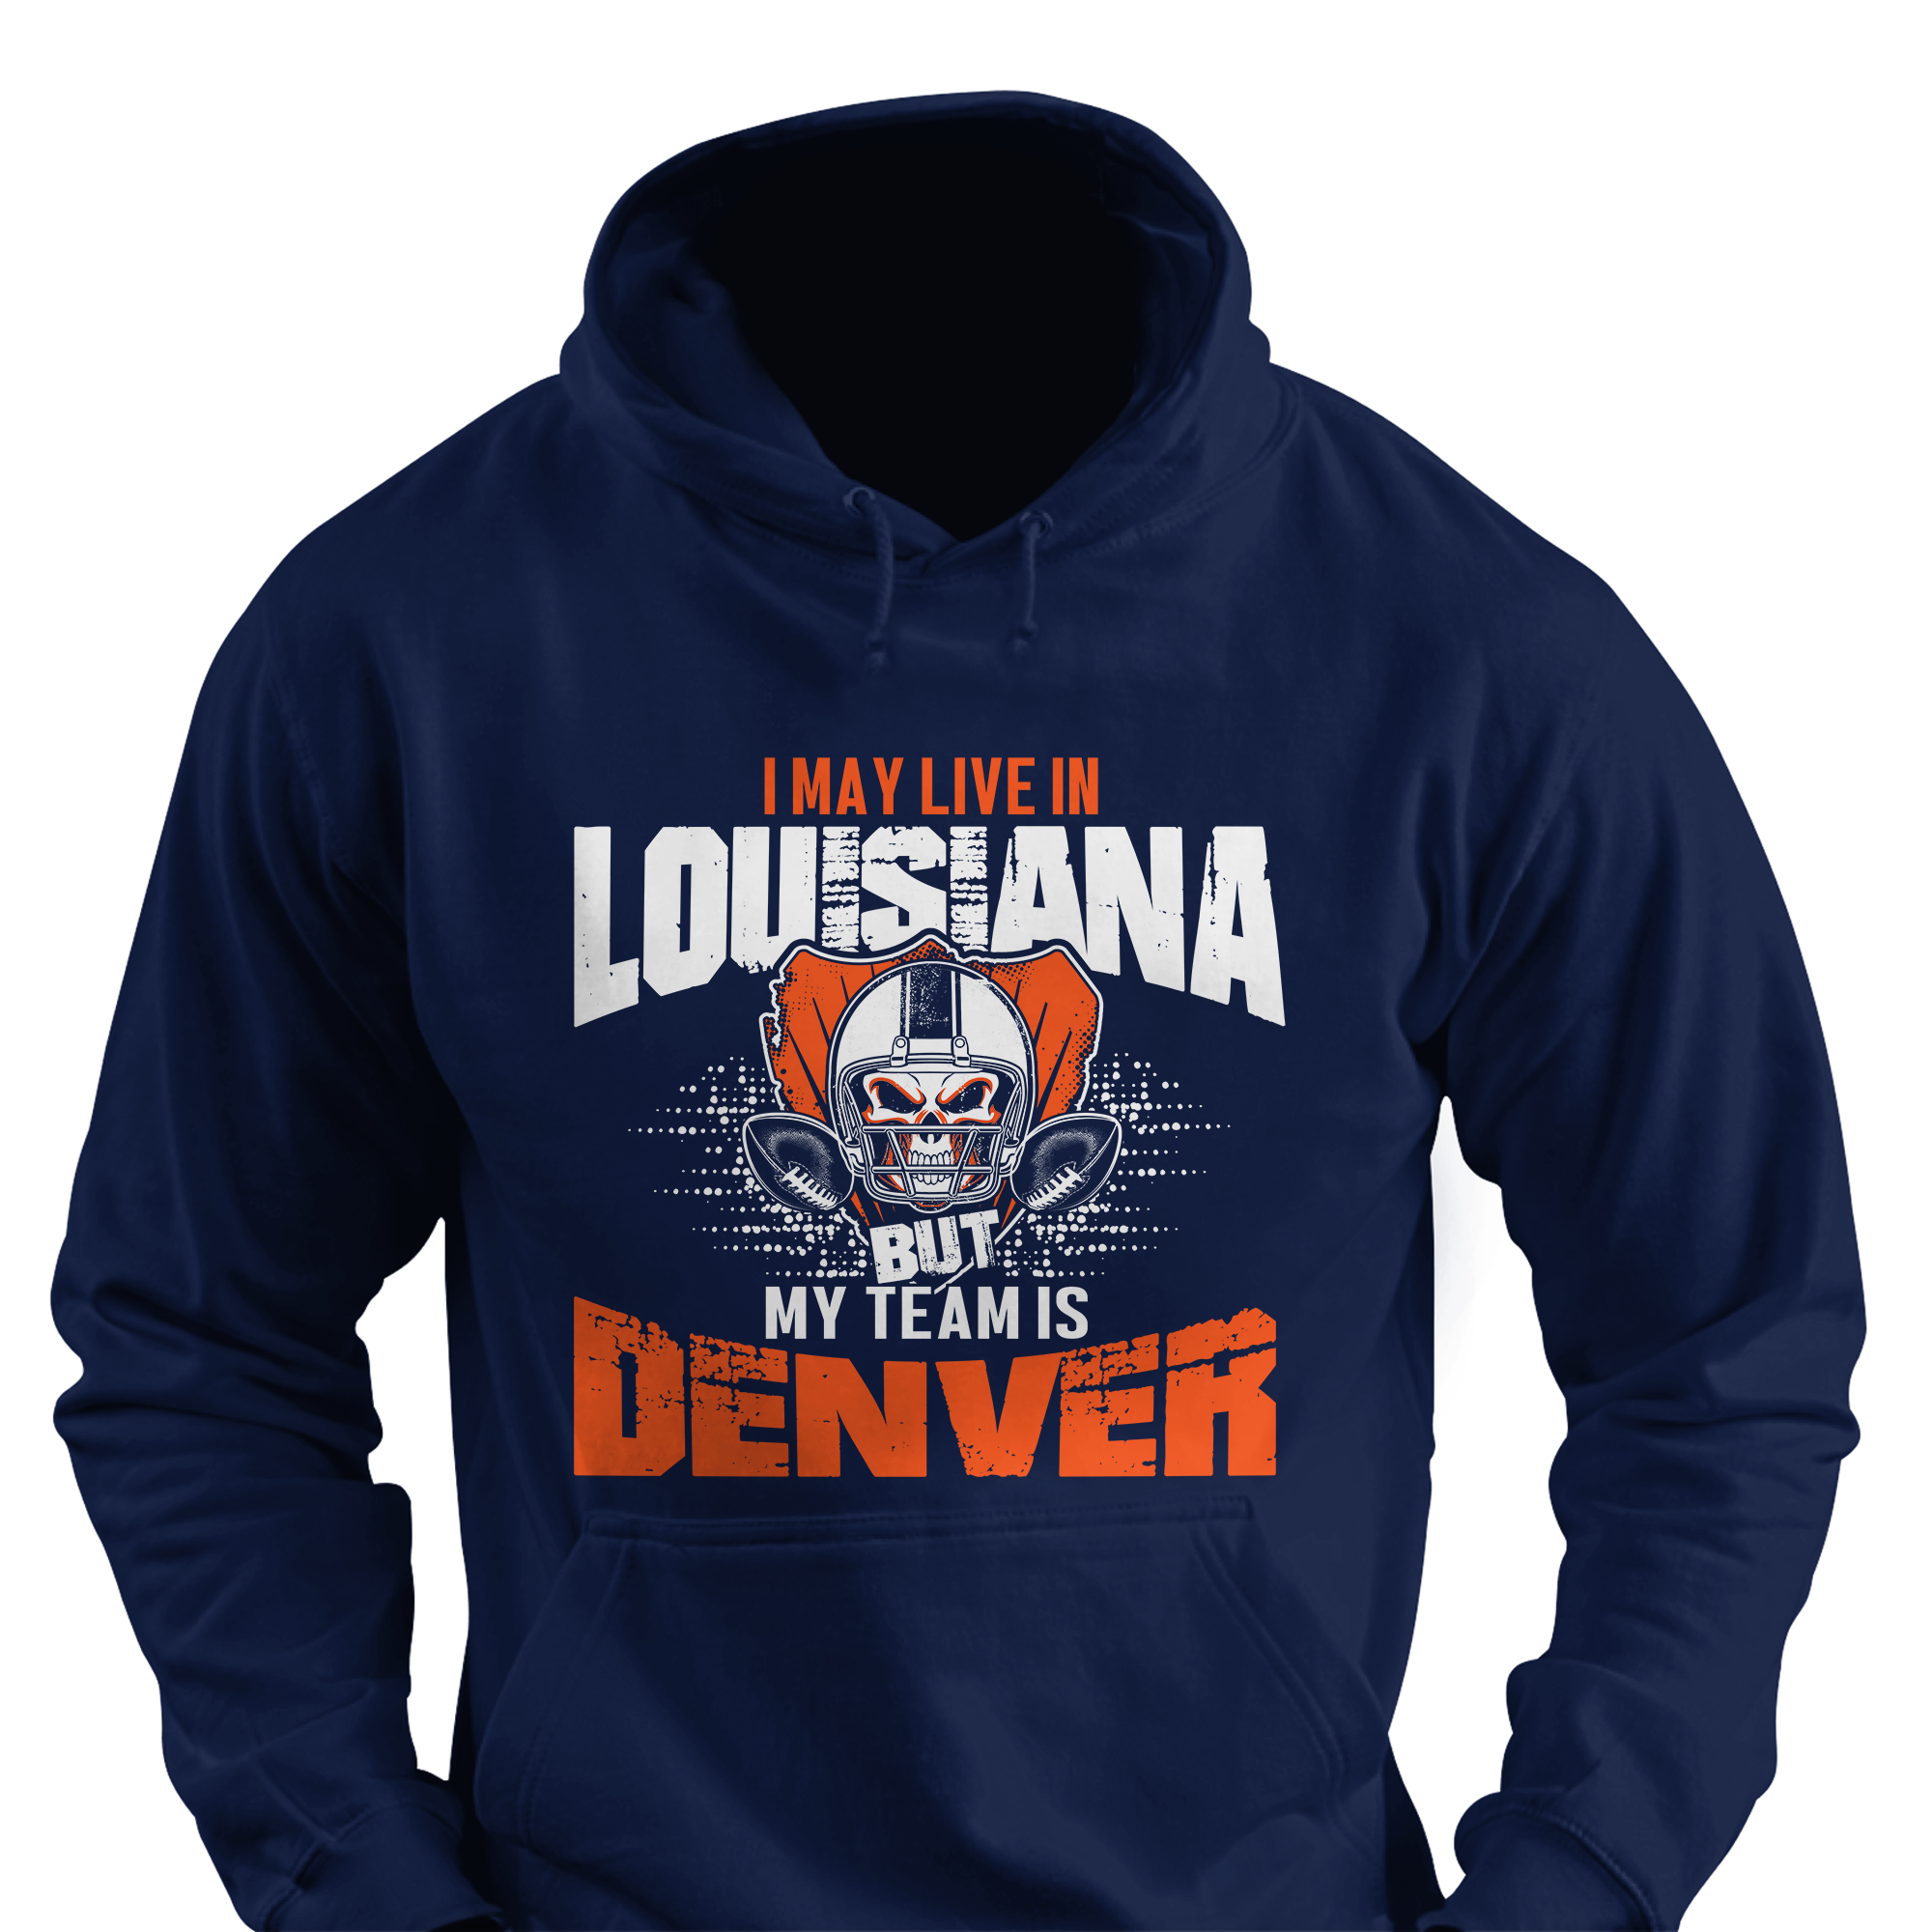 I May Live in Louisiana but My Team is Denver